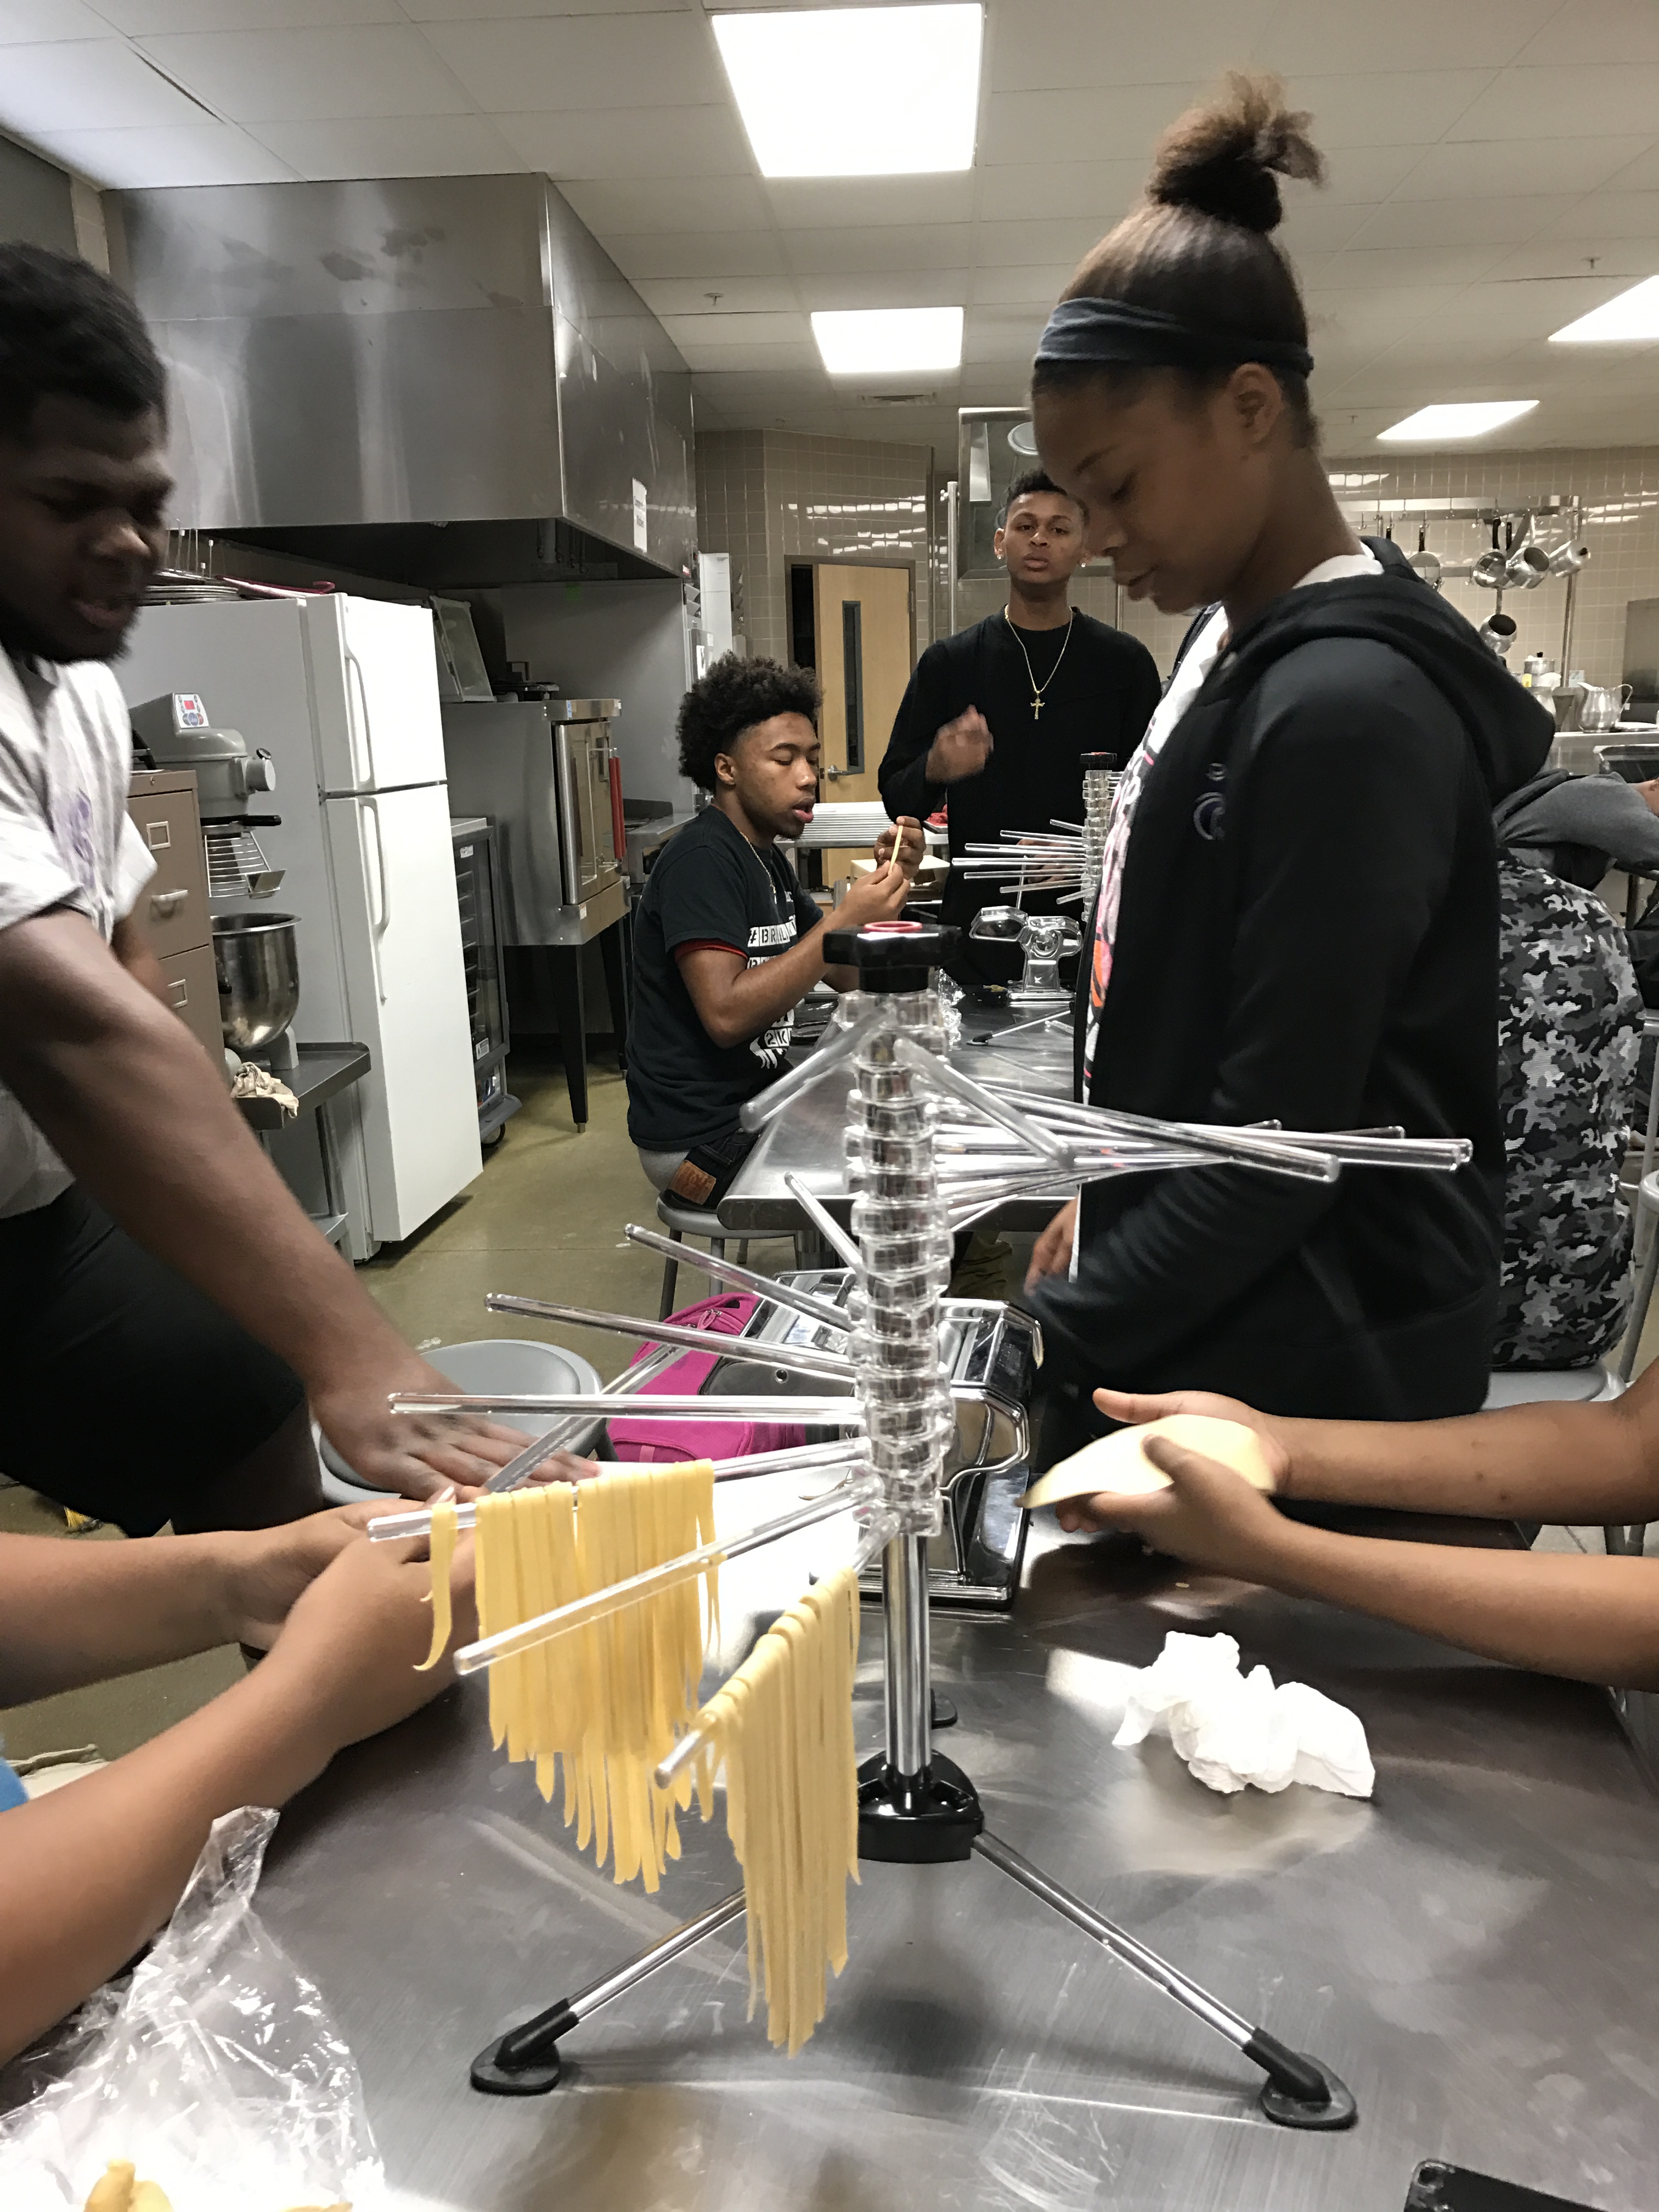 A photo of some students making pasta.